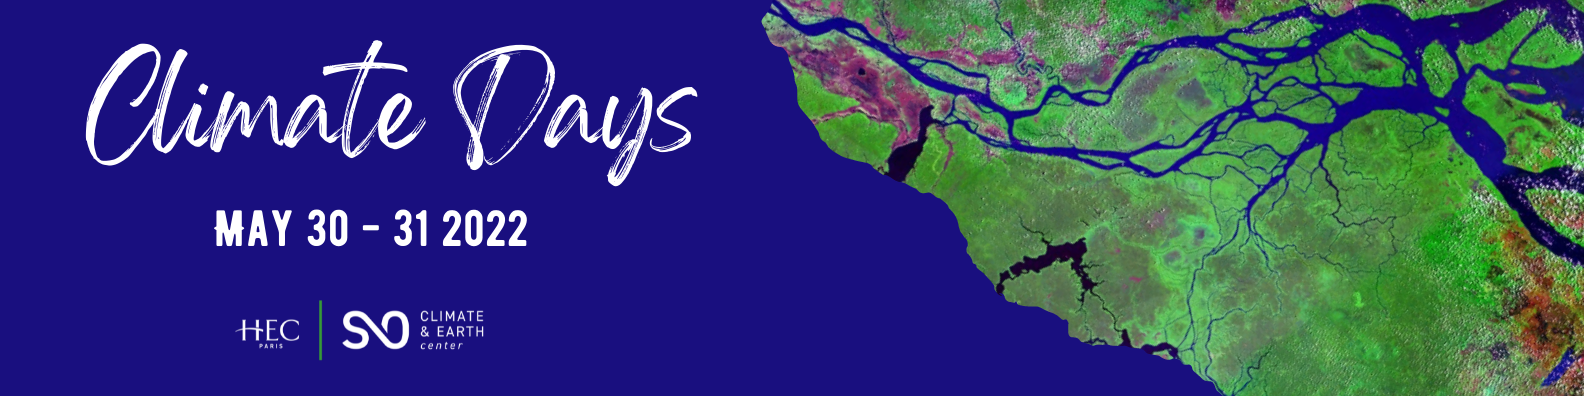 Climate Days banner